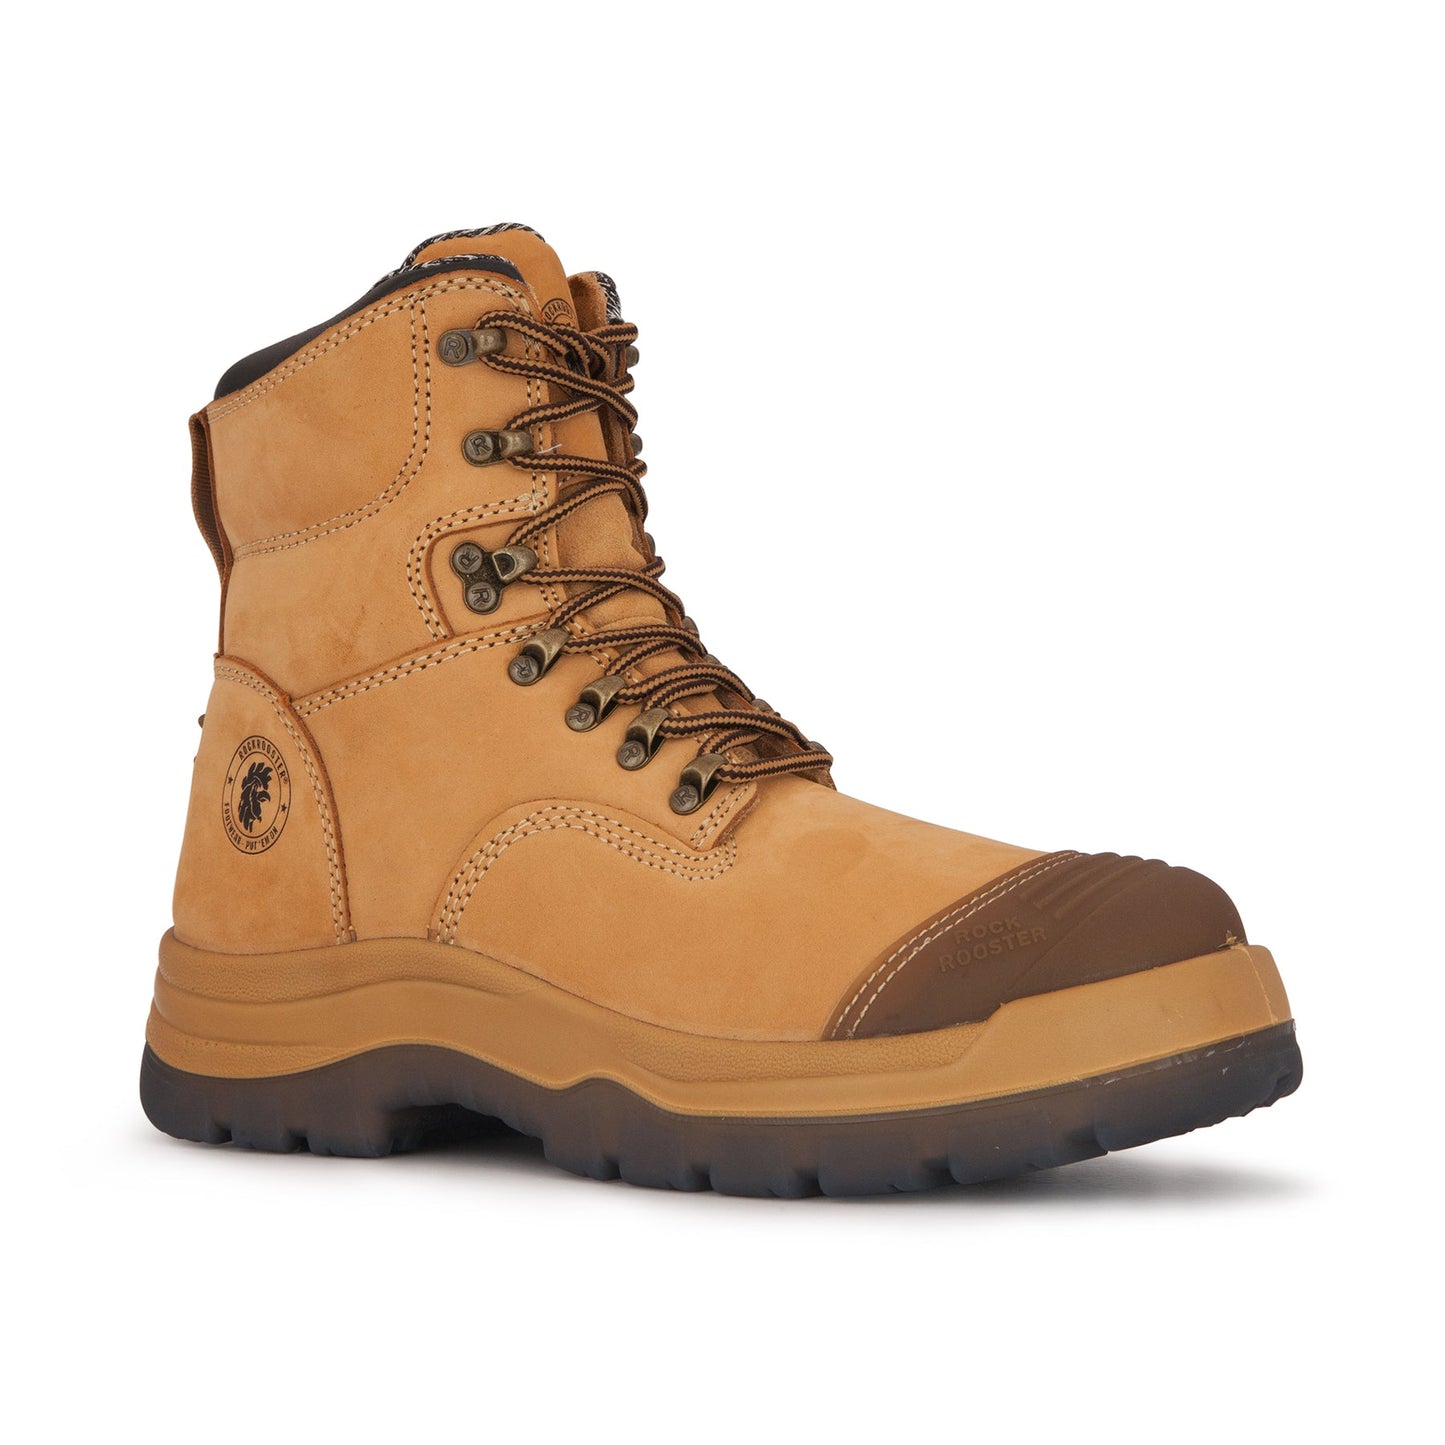 7" Zip-sided Steel Toe Leather Work Boots - The Kimberly